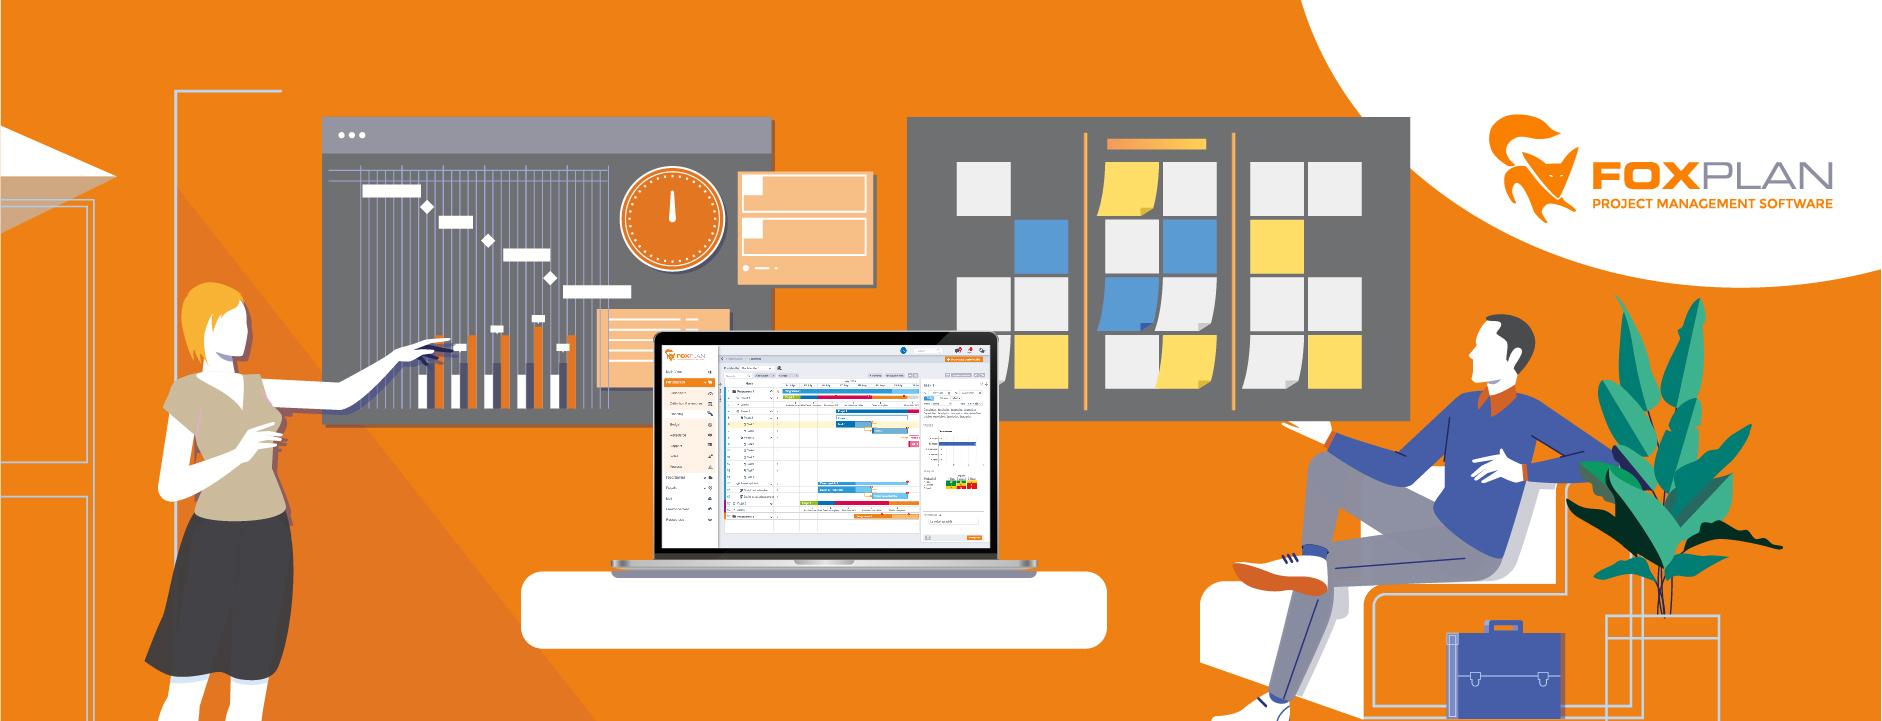 Review FoxPlan: Ready-to-use project management software PPM - Appvizer